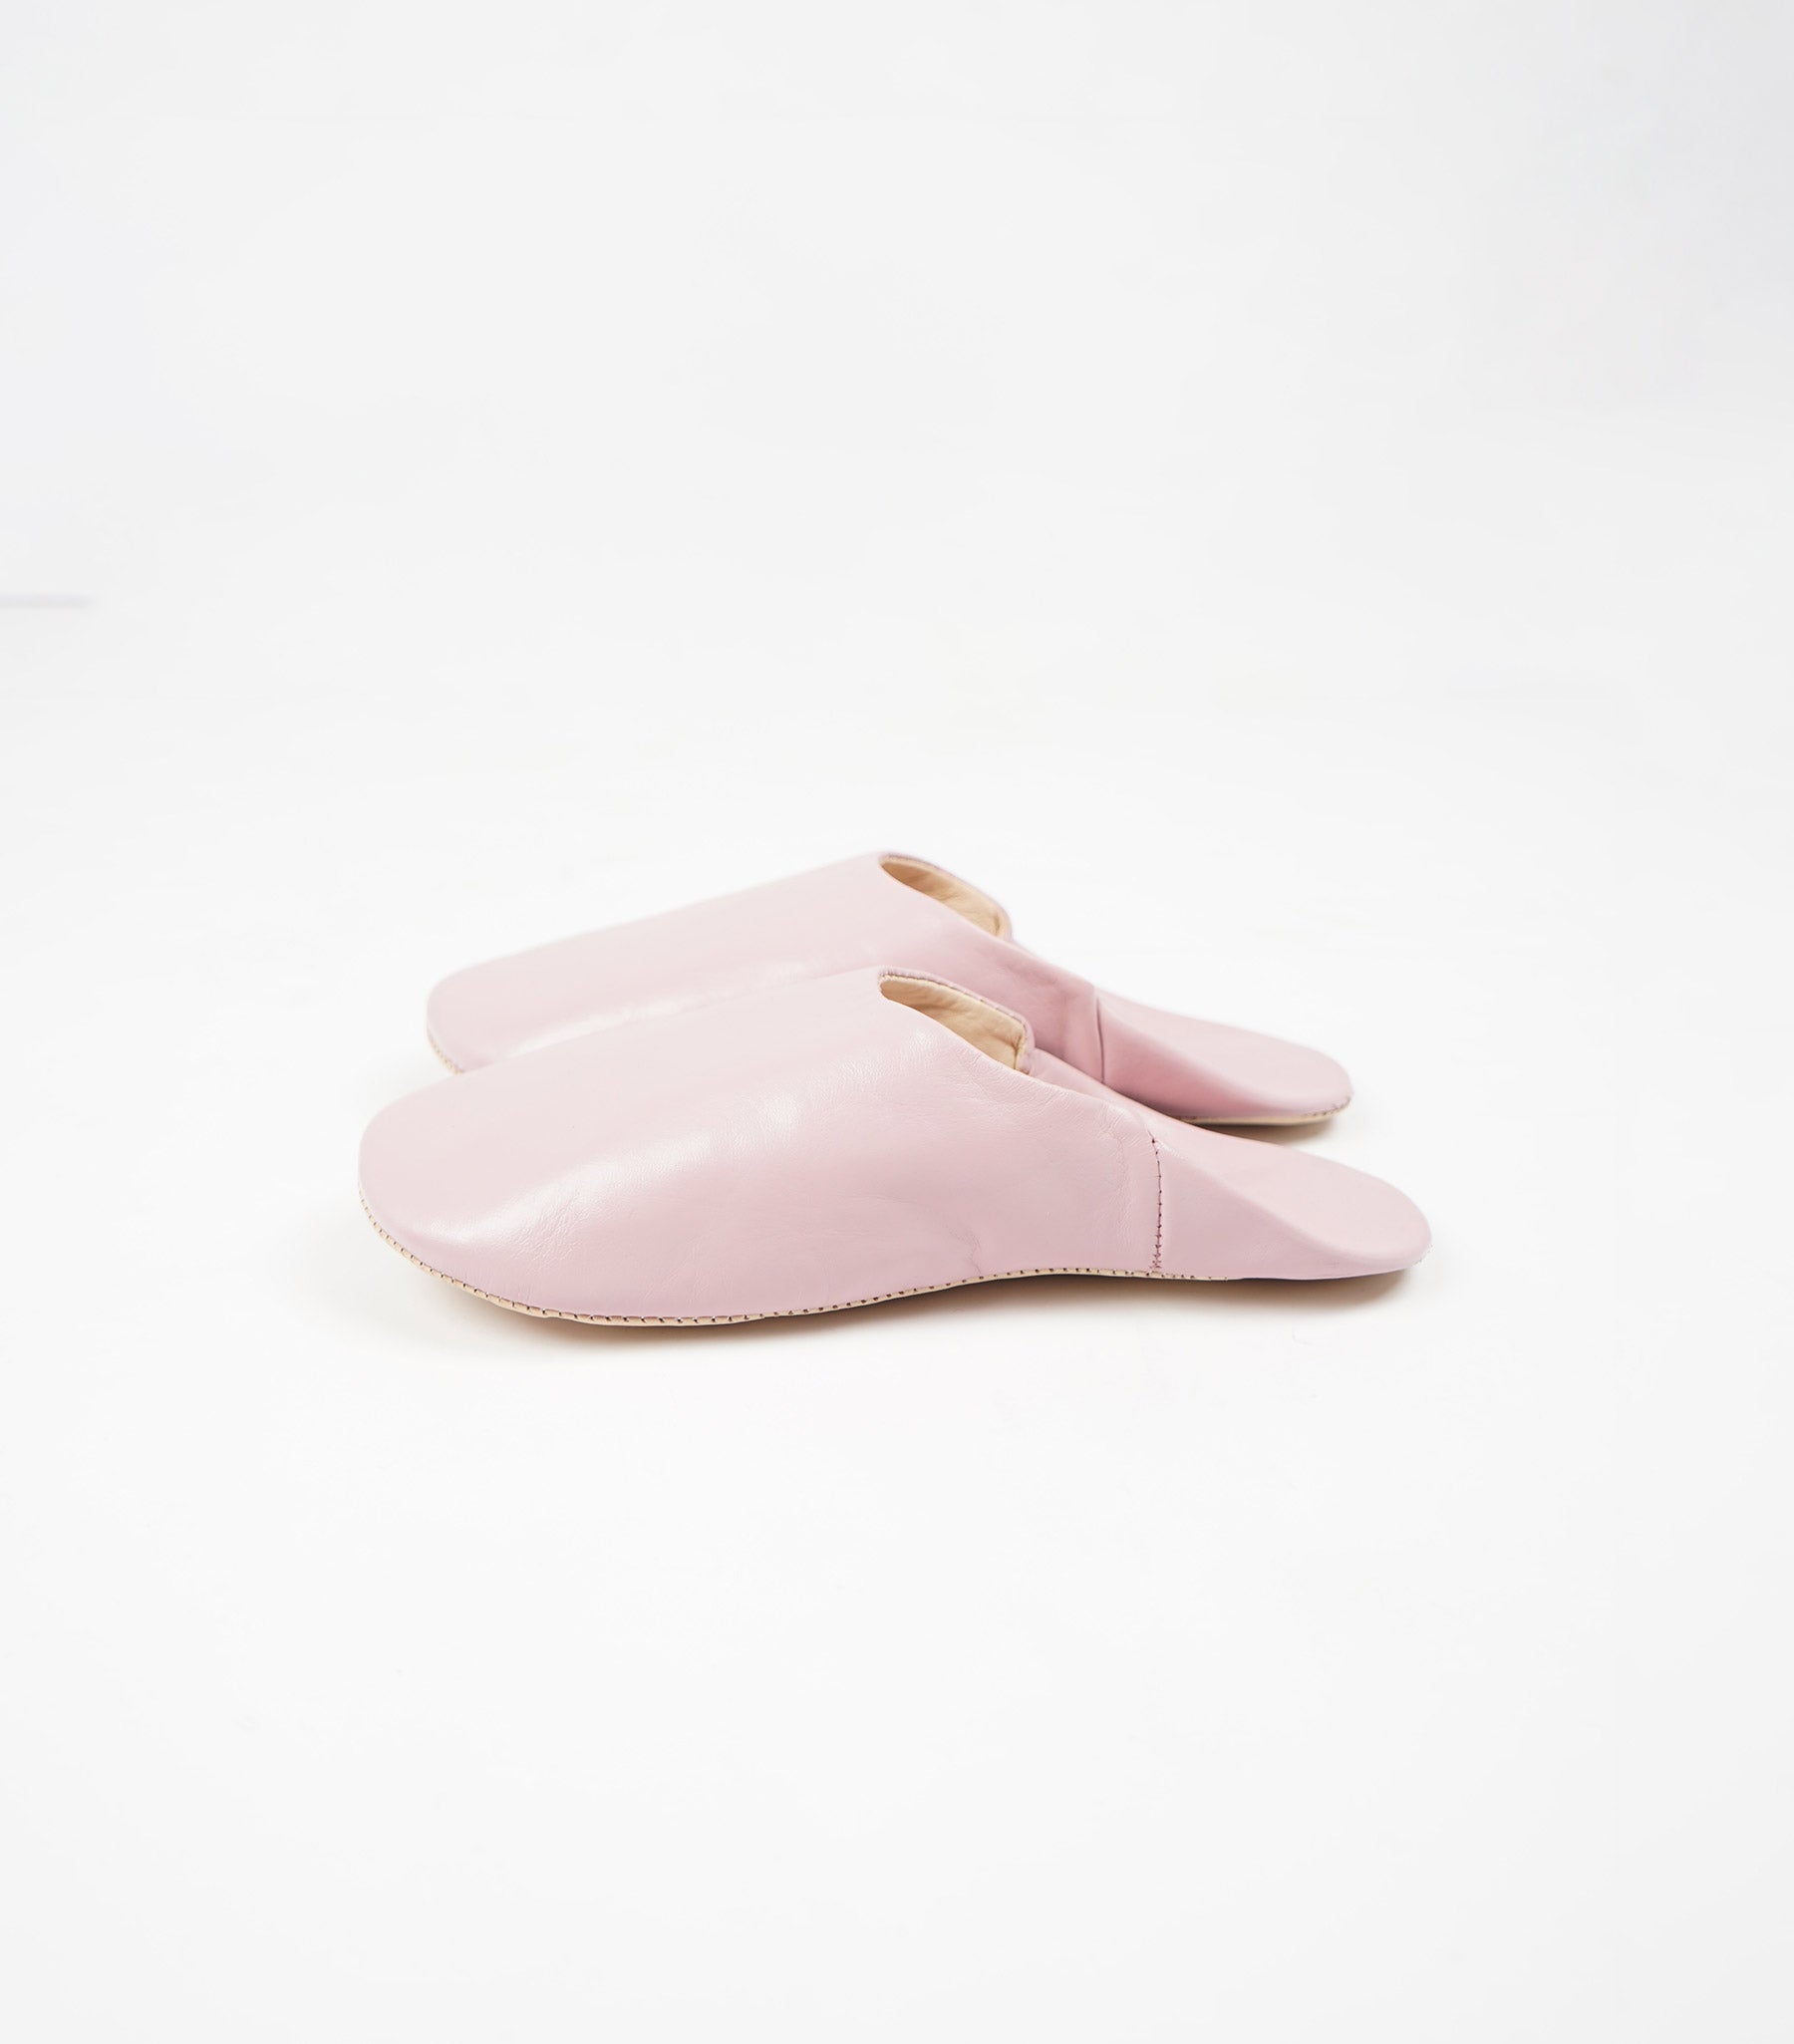 Moroccan Babouche Basic Slippers, Pink